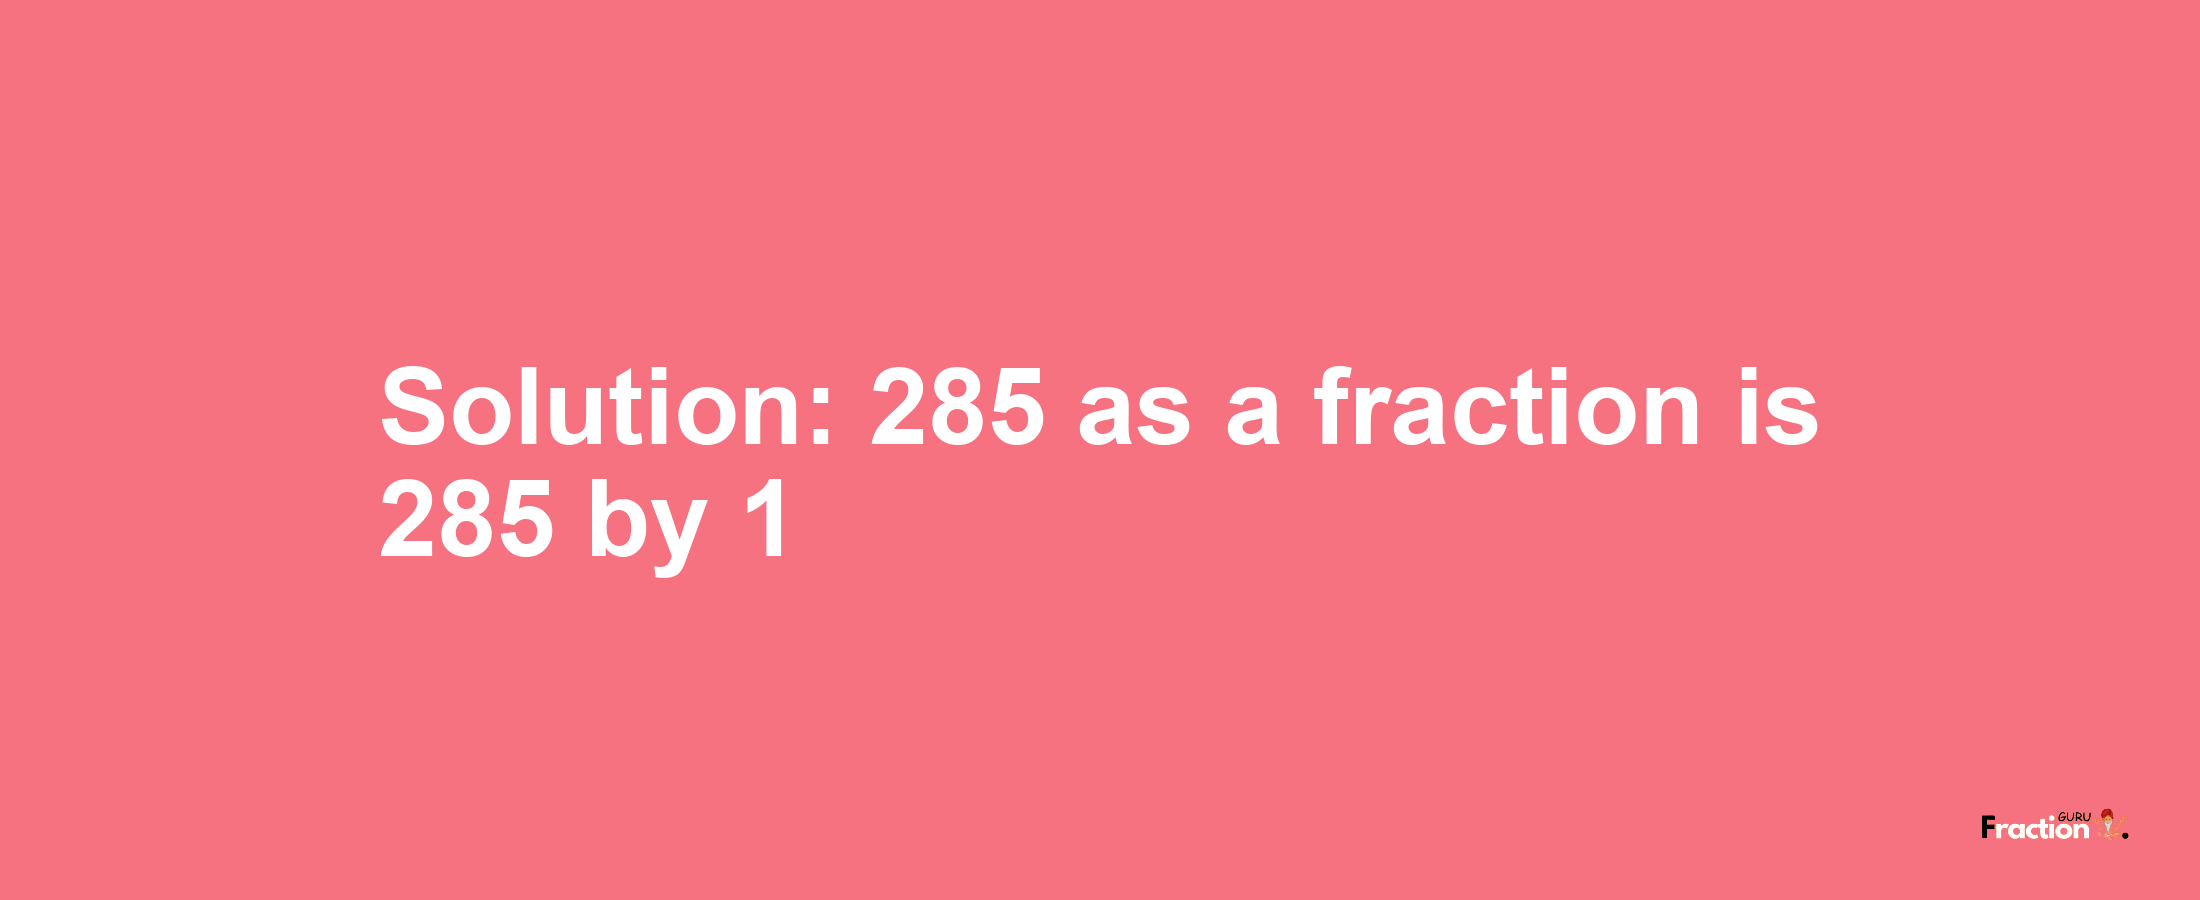 Solution:285 as a fraction is 285/1